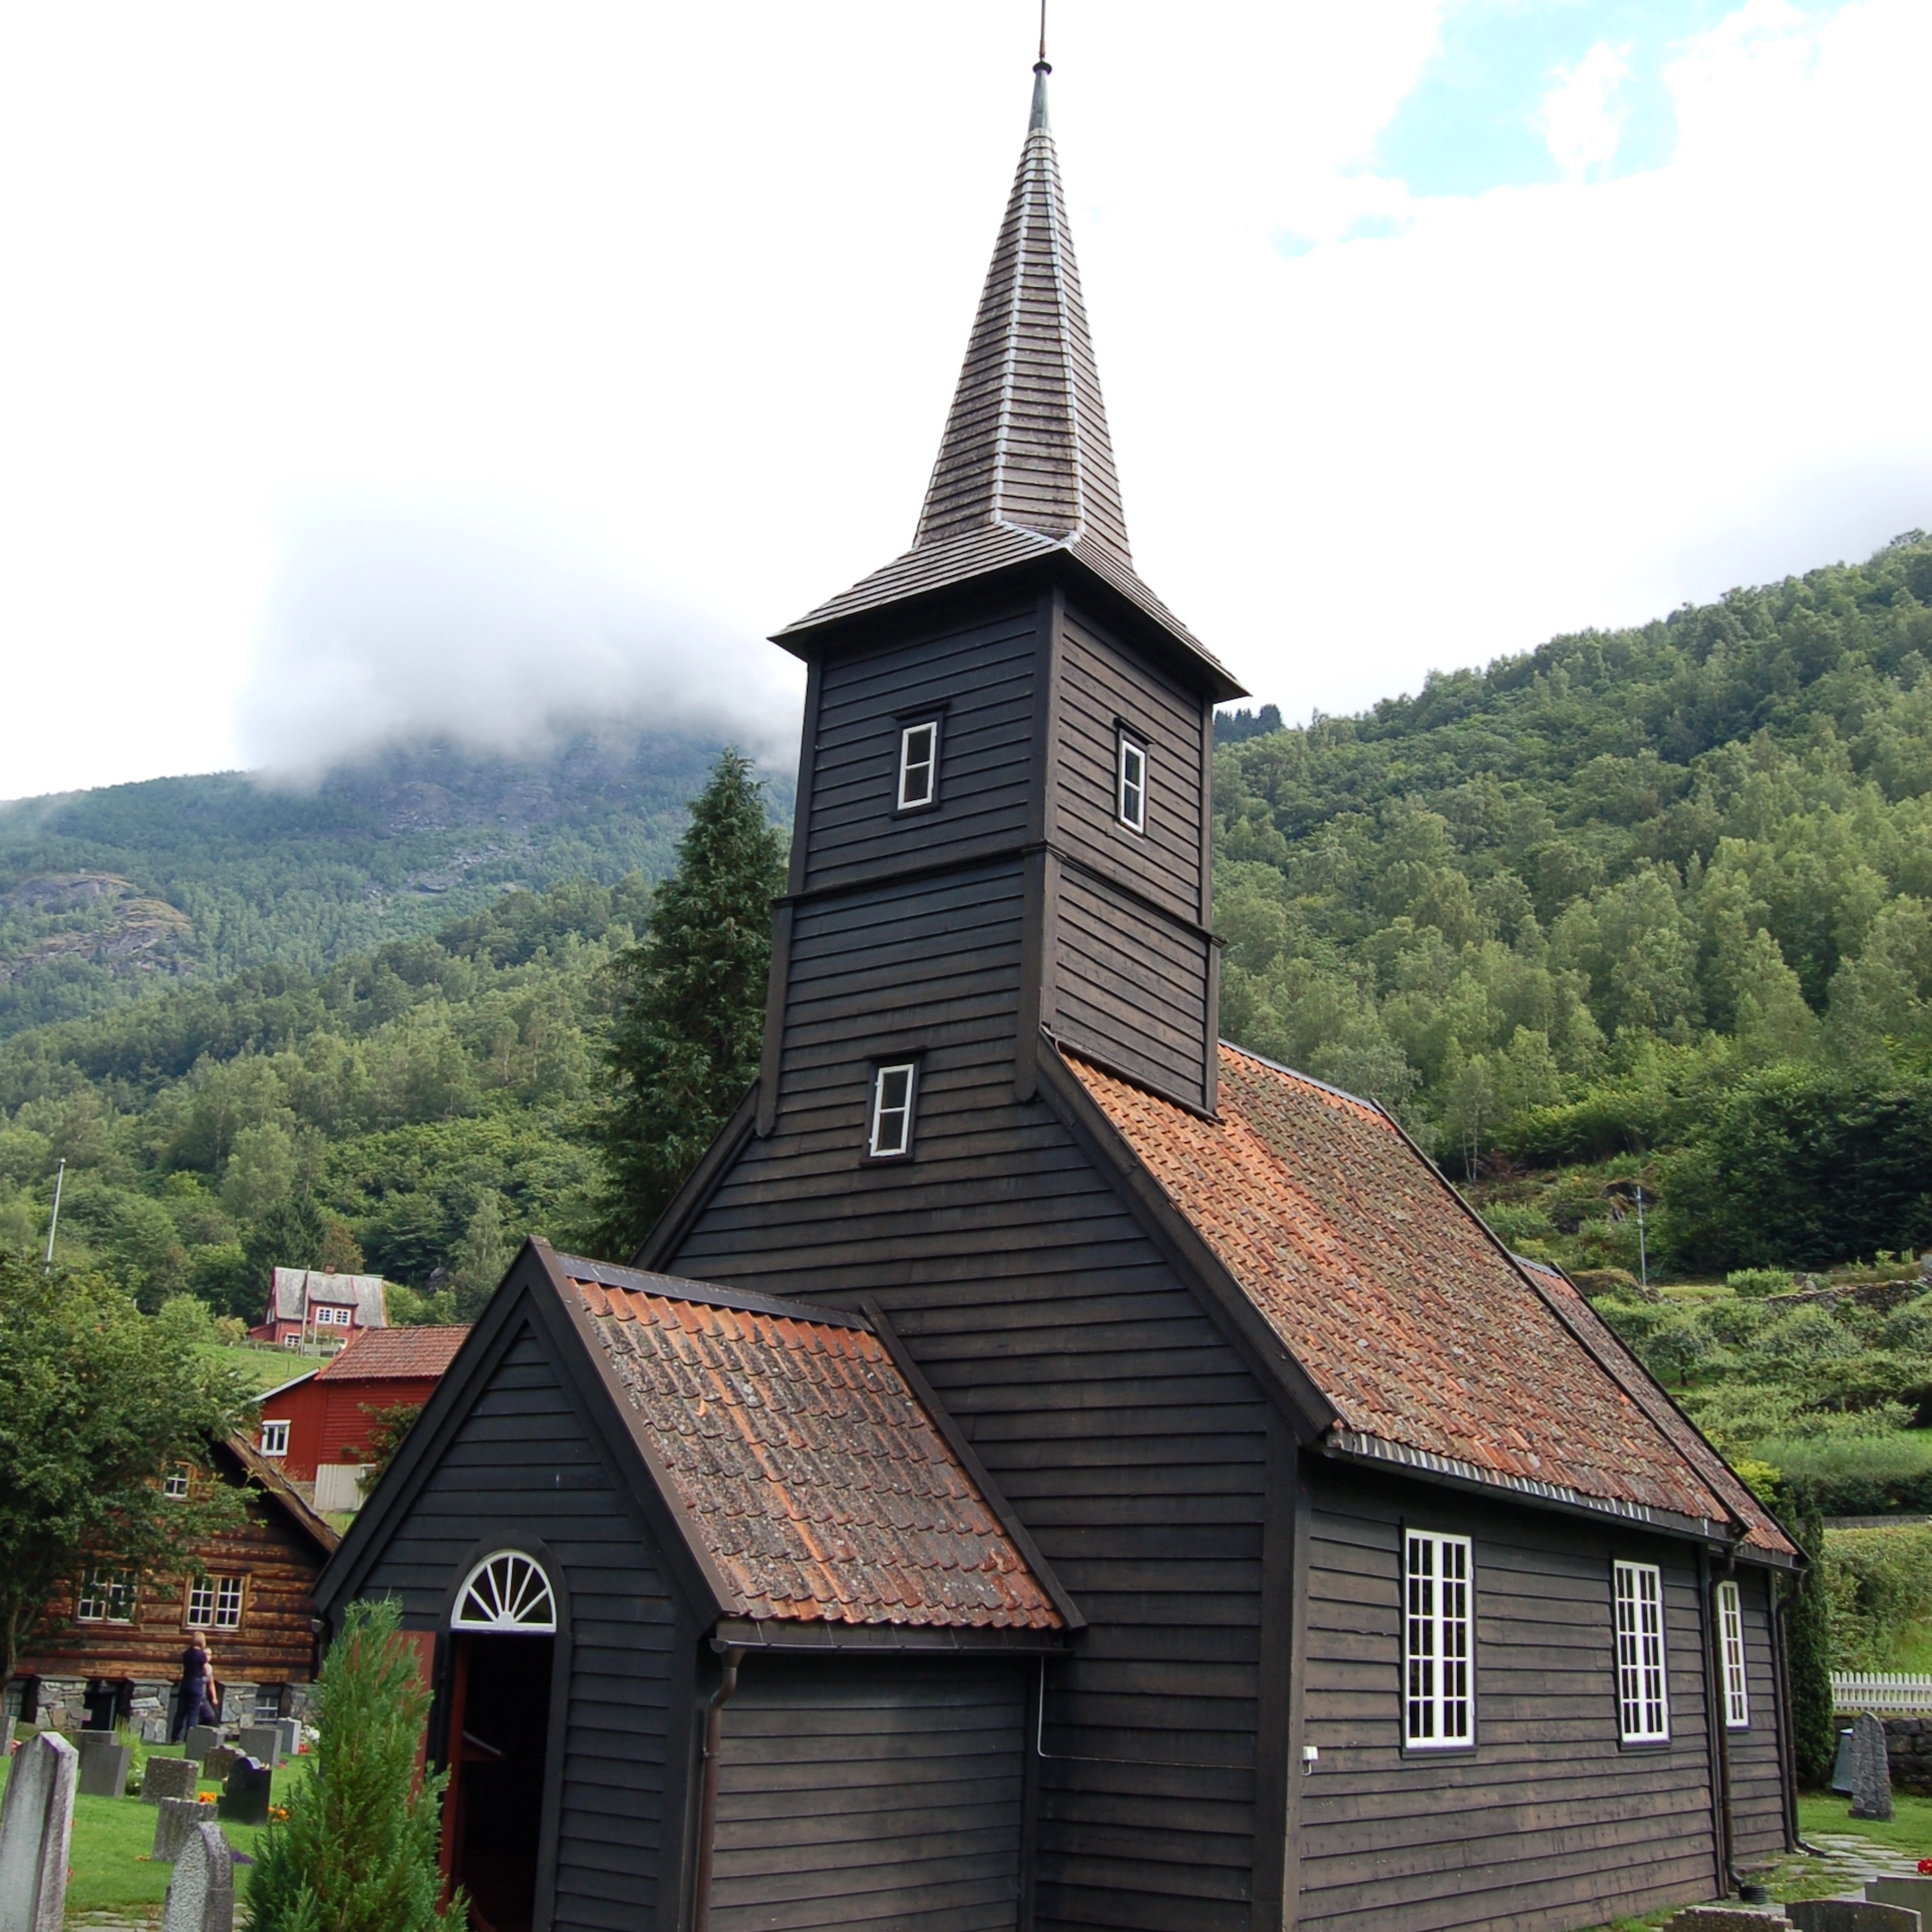 Flåm Church - Waterfall and culture tour in Flåm, Norway